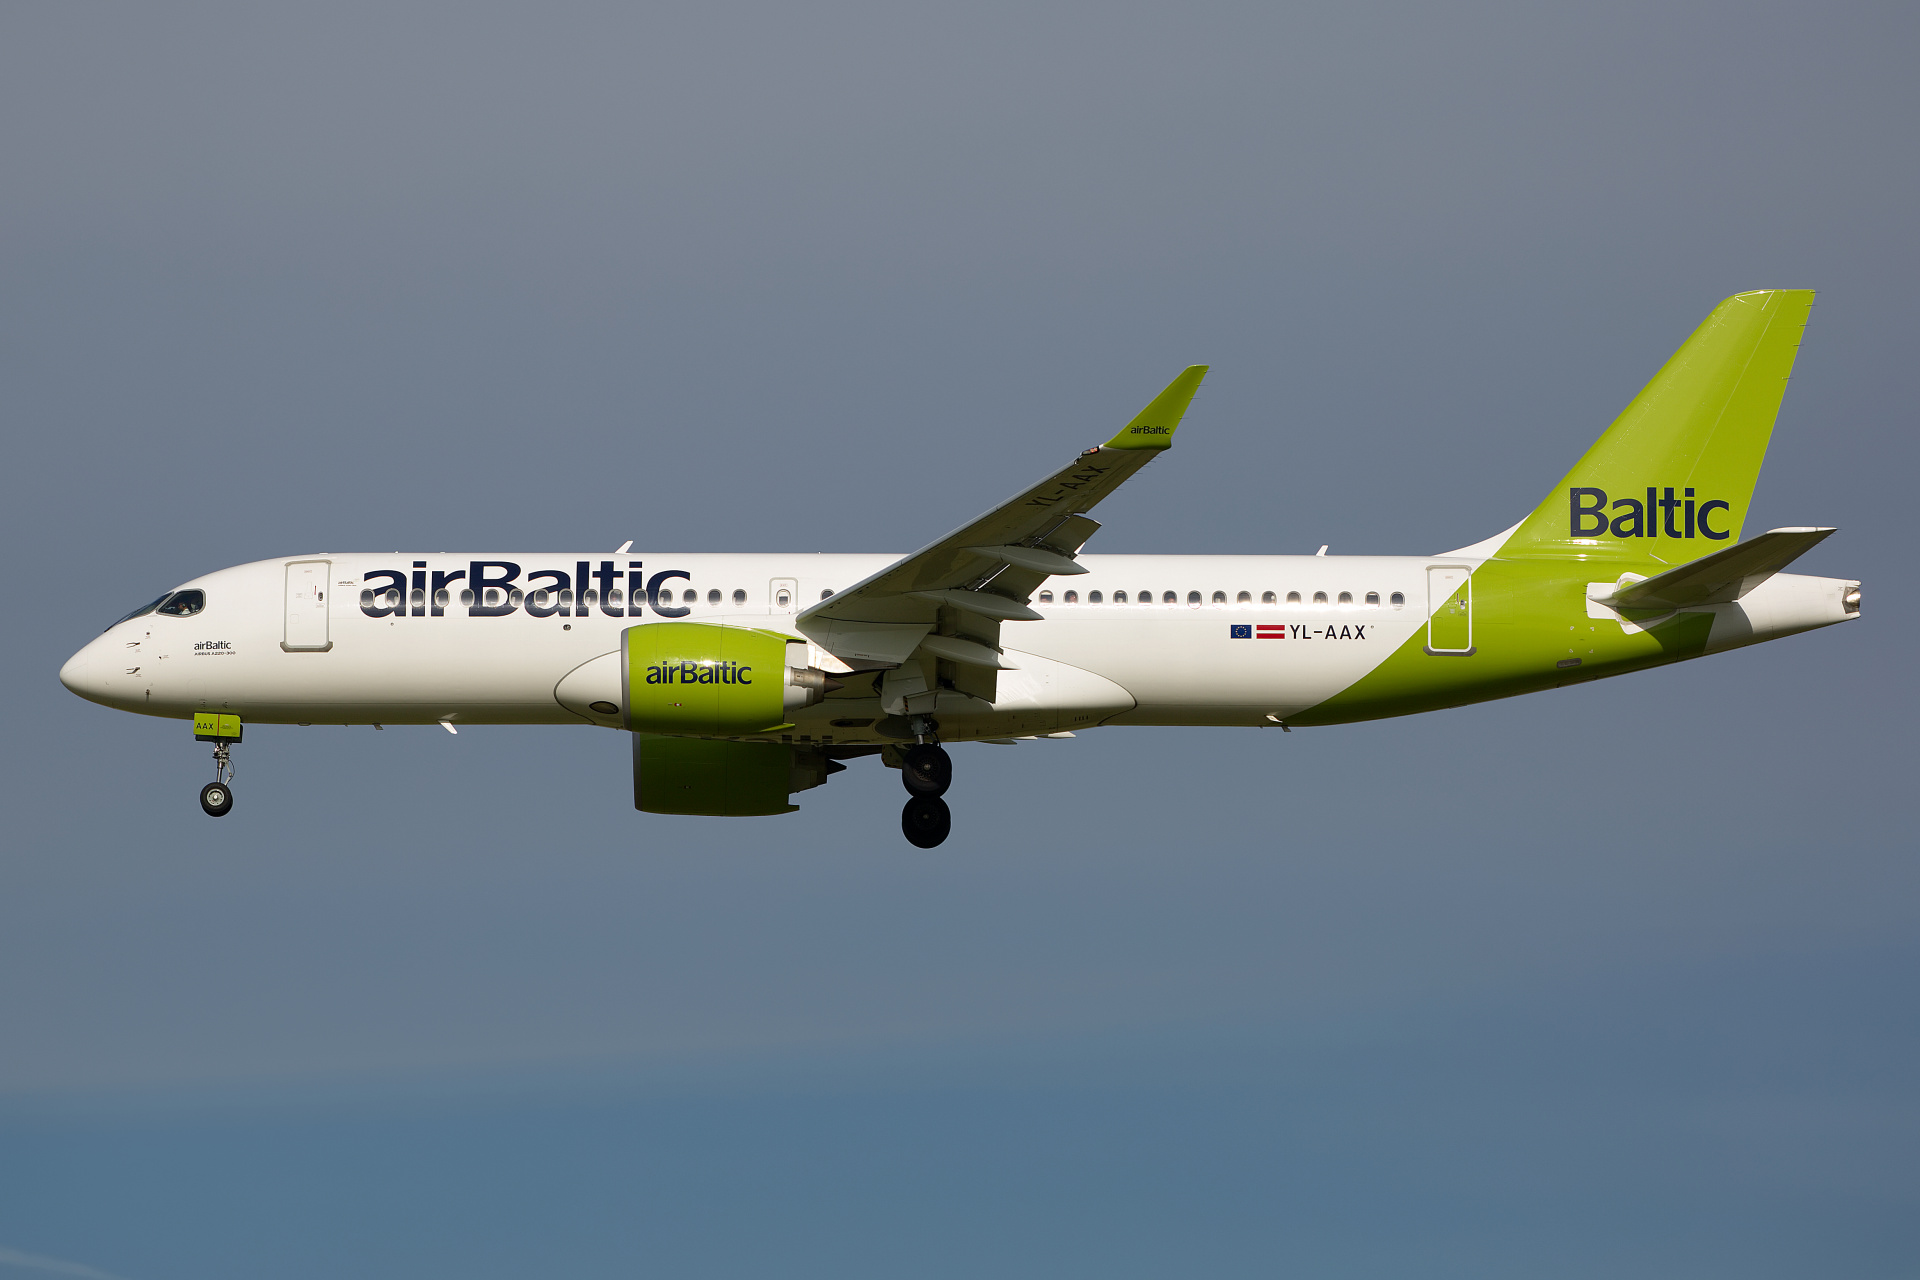 YL-AAX, airBaltic (Aircraft » Schiphol Spotting » Airbus A220-300)